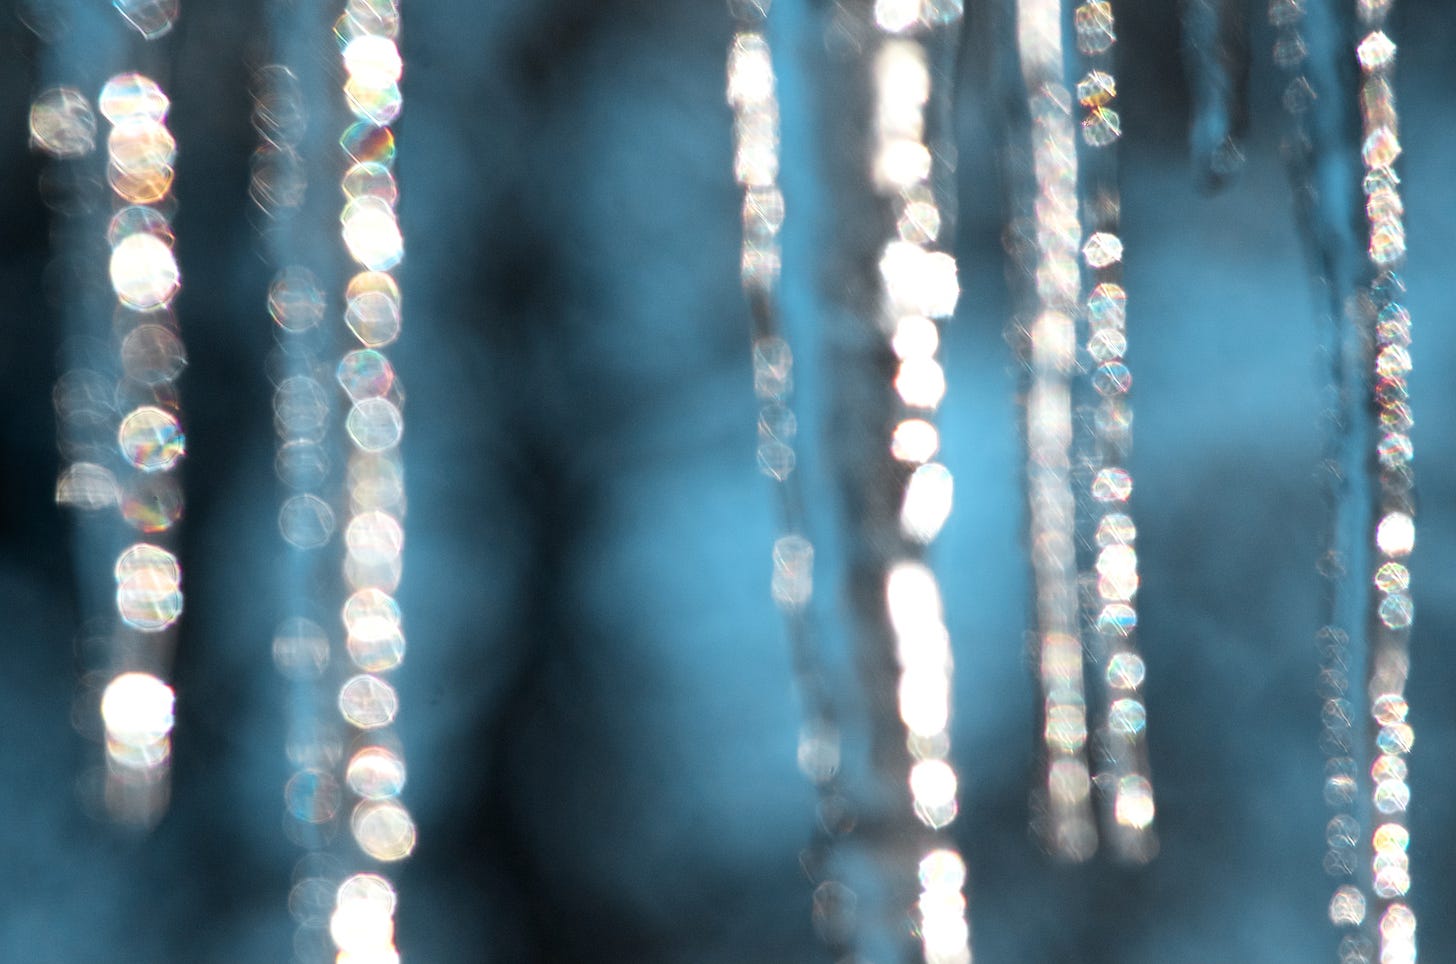 An abstract image uses a soft focus on an icicle forest, with teal shadowy background and vertical stripes of diamond-shimmer bokeh.